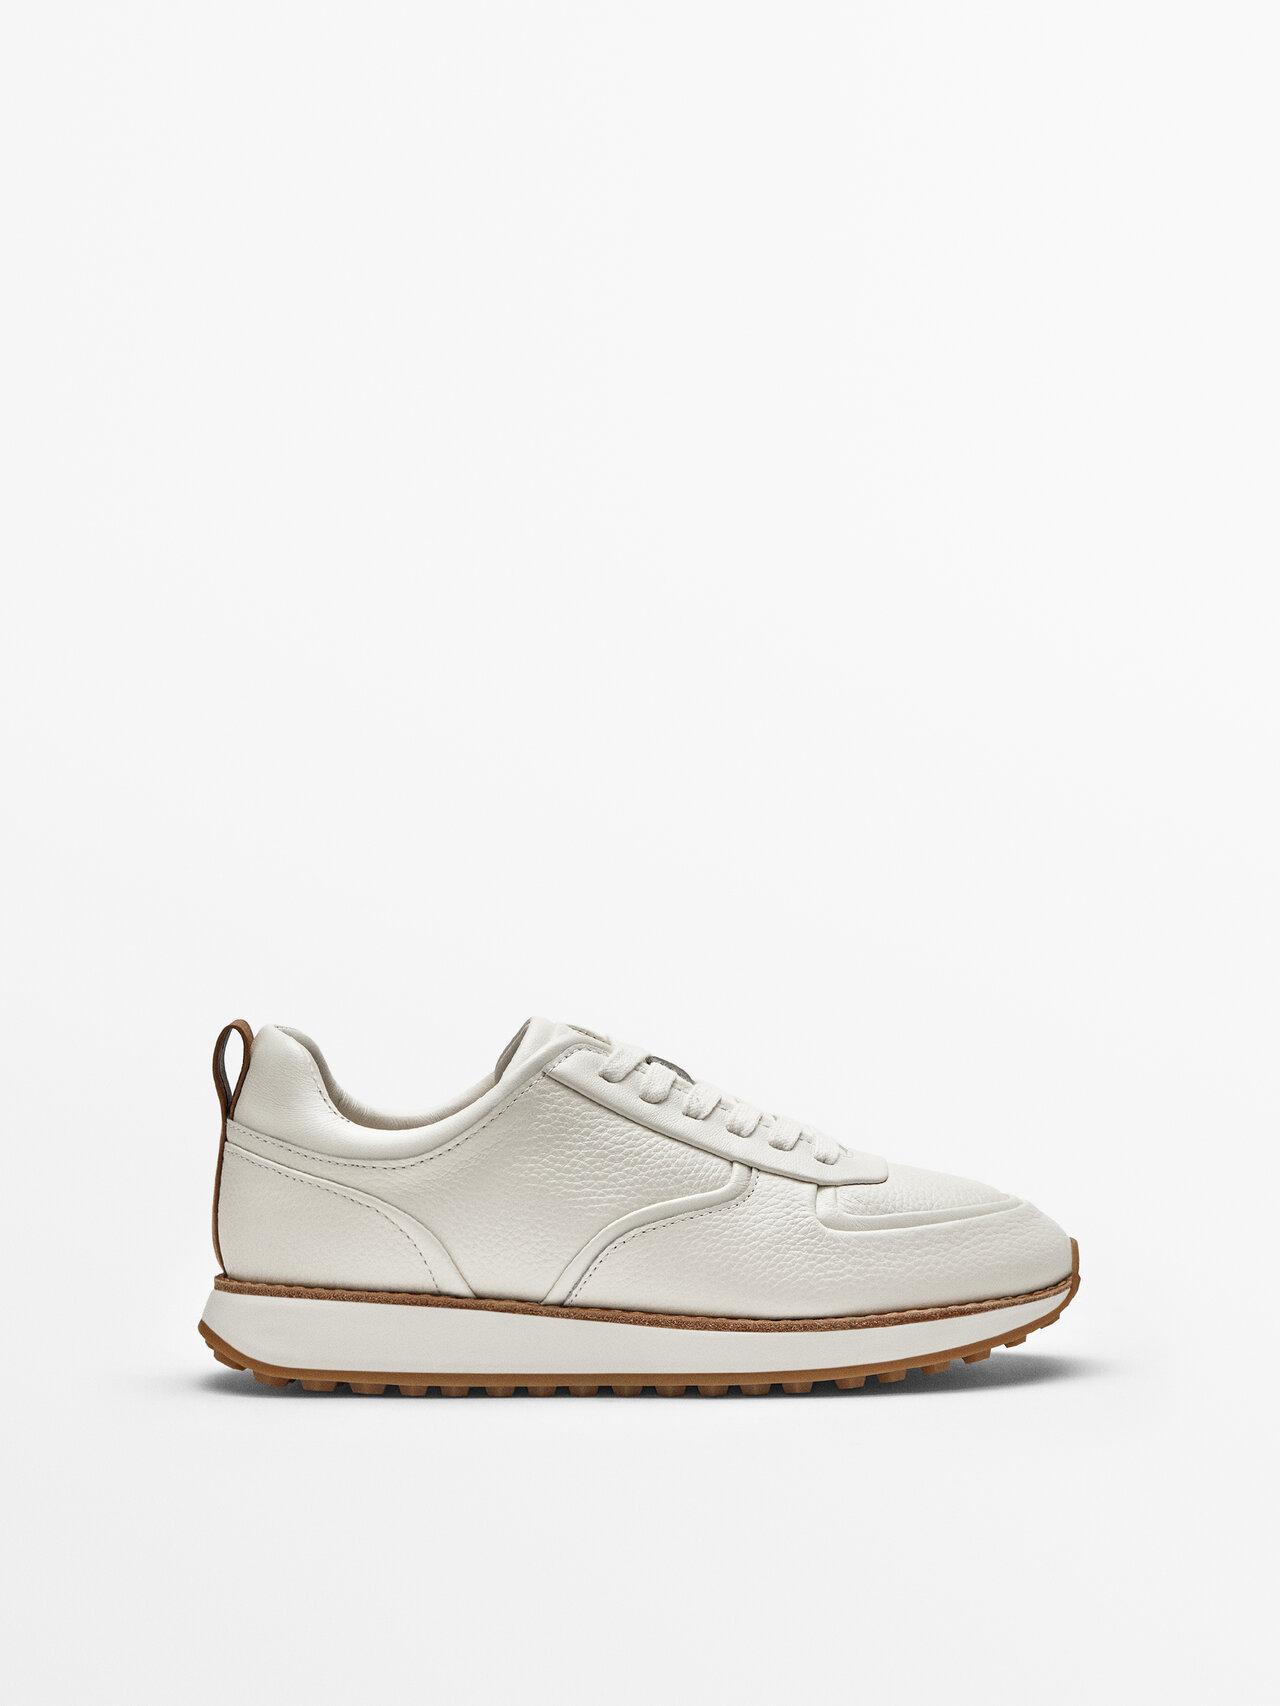 MASSIMO DUTTI Tumbled Leather Trainers in White | Lyst